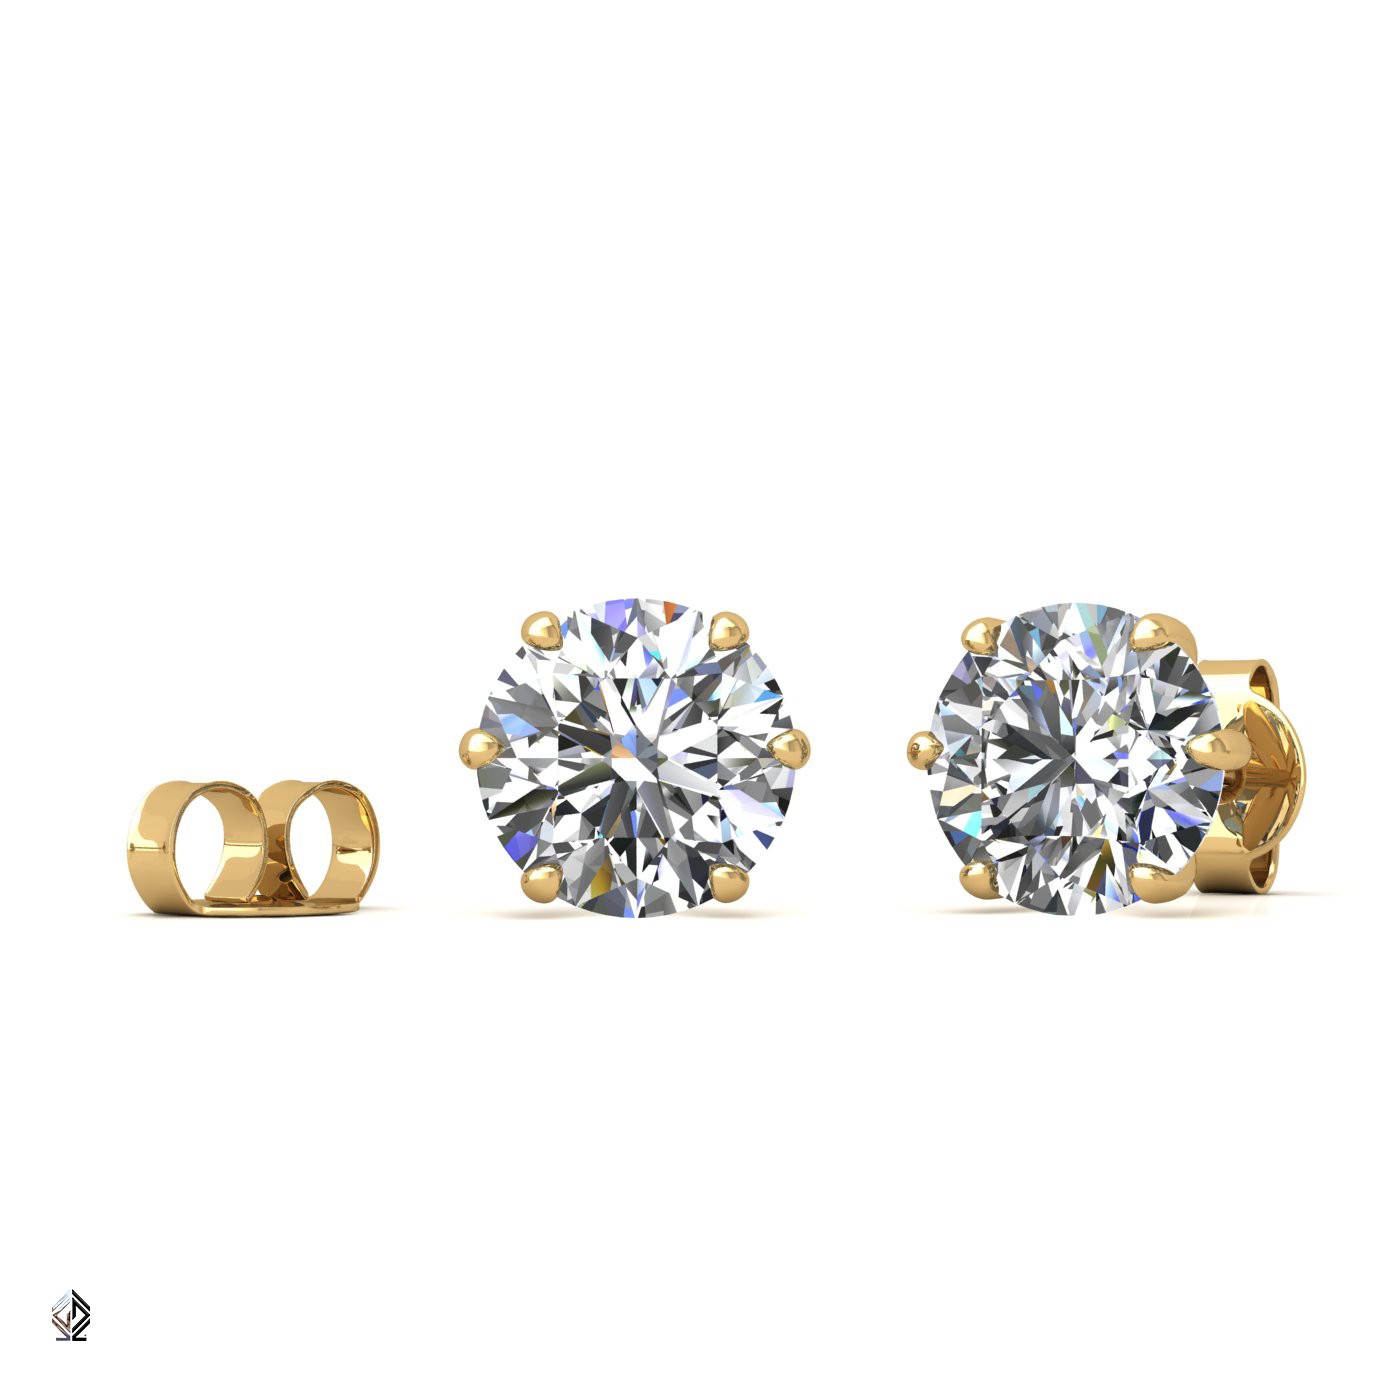 18k yellow gold 2.0 ct each (4,0 tcw) 6 prongs round shape diamond earrings Photos & images